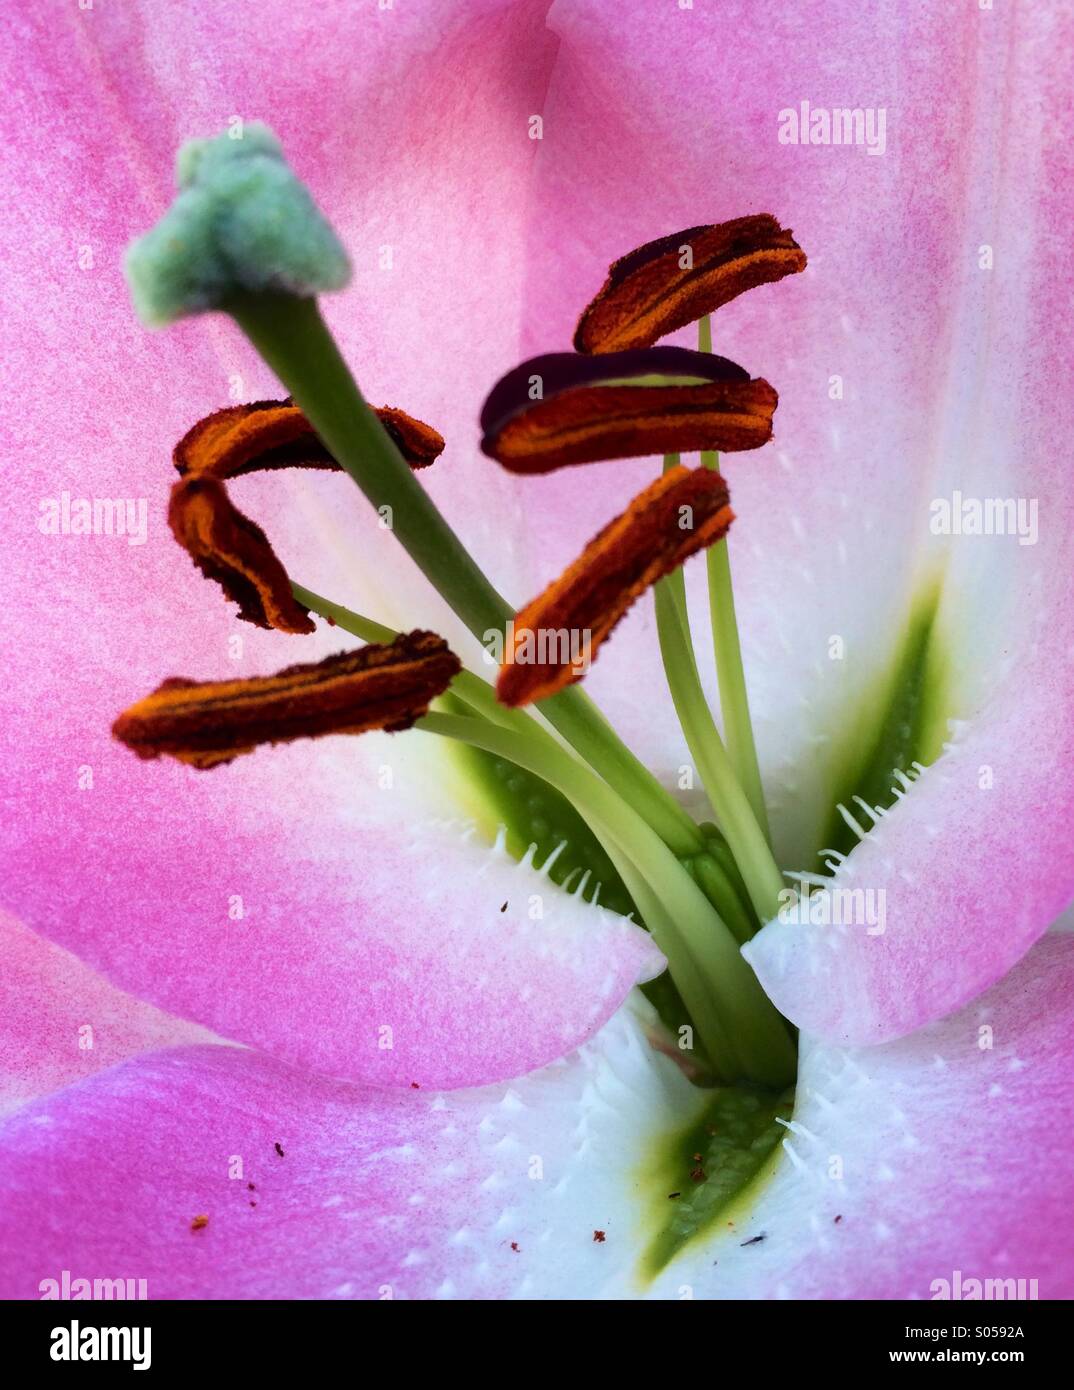 Lily. Stock Photo